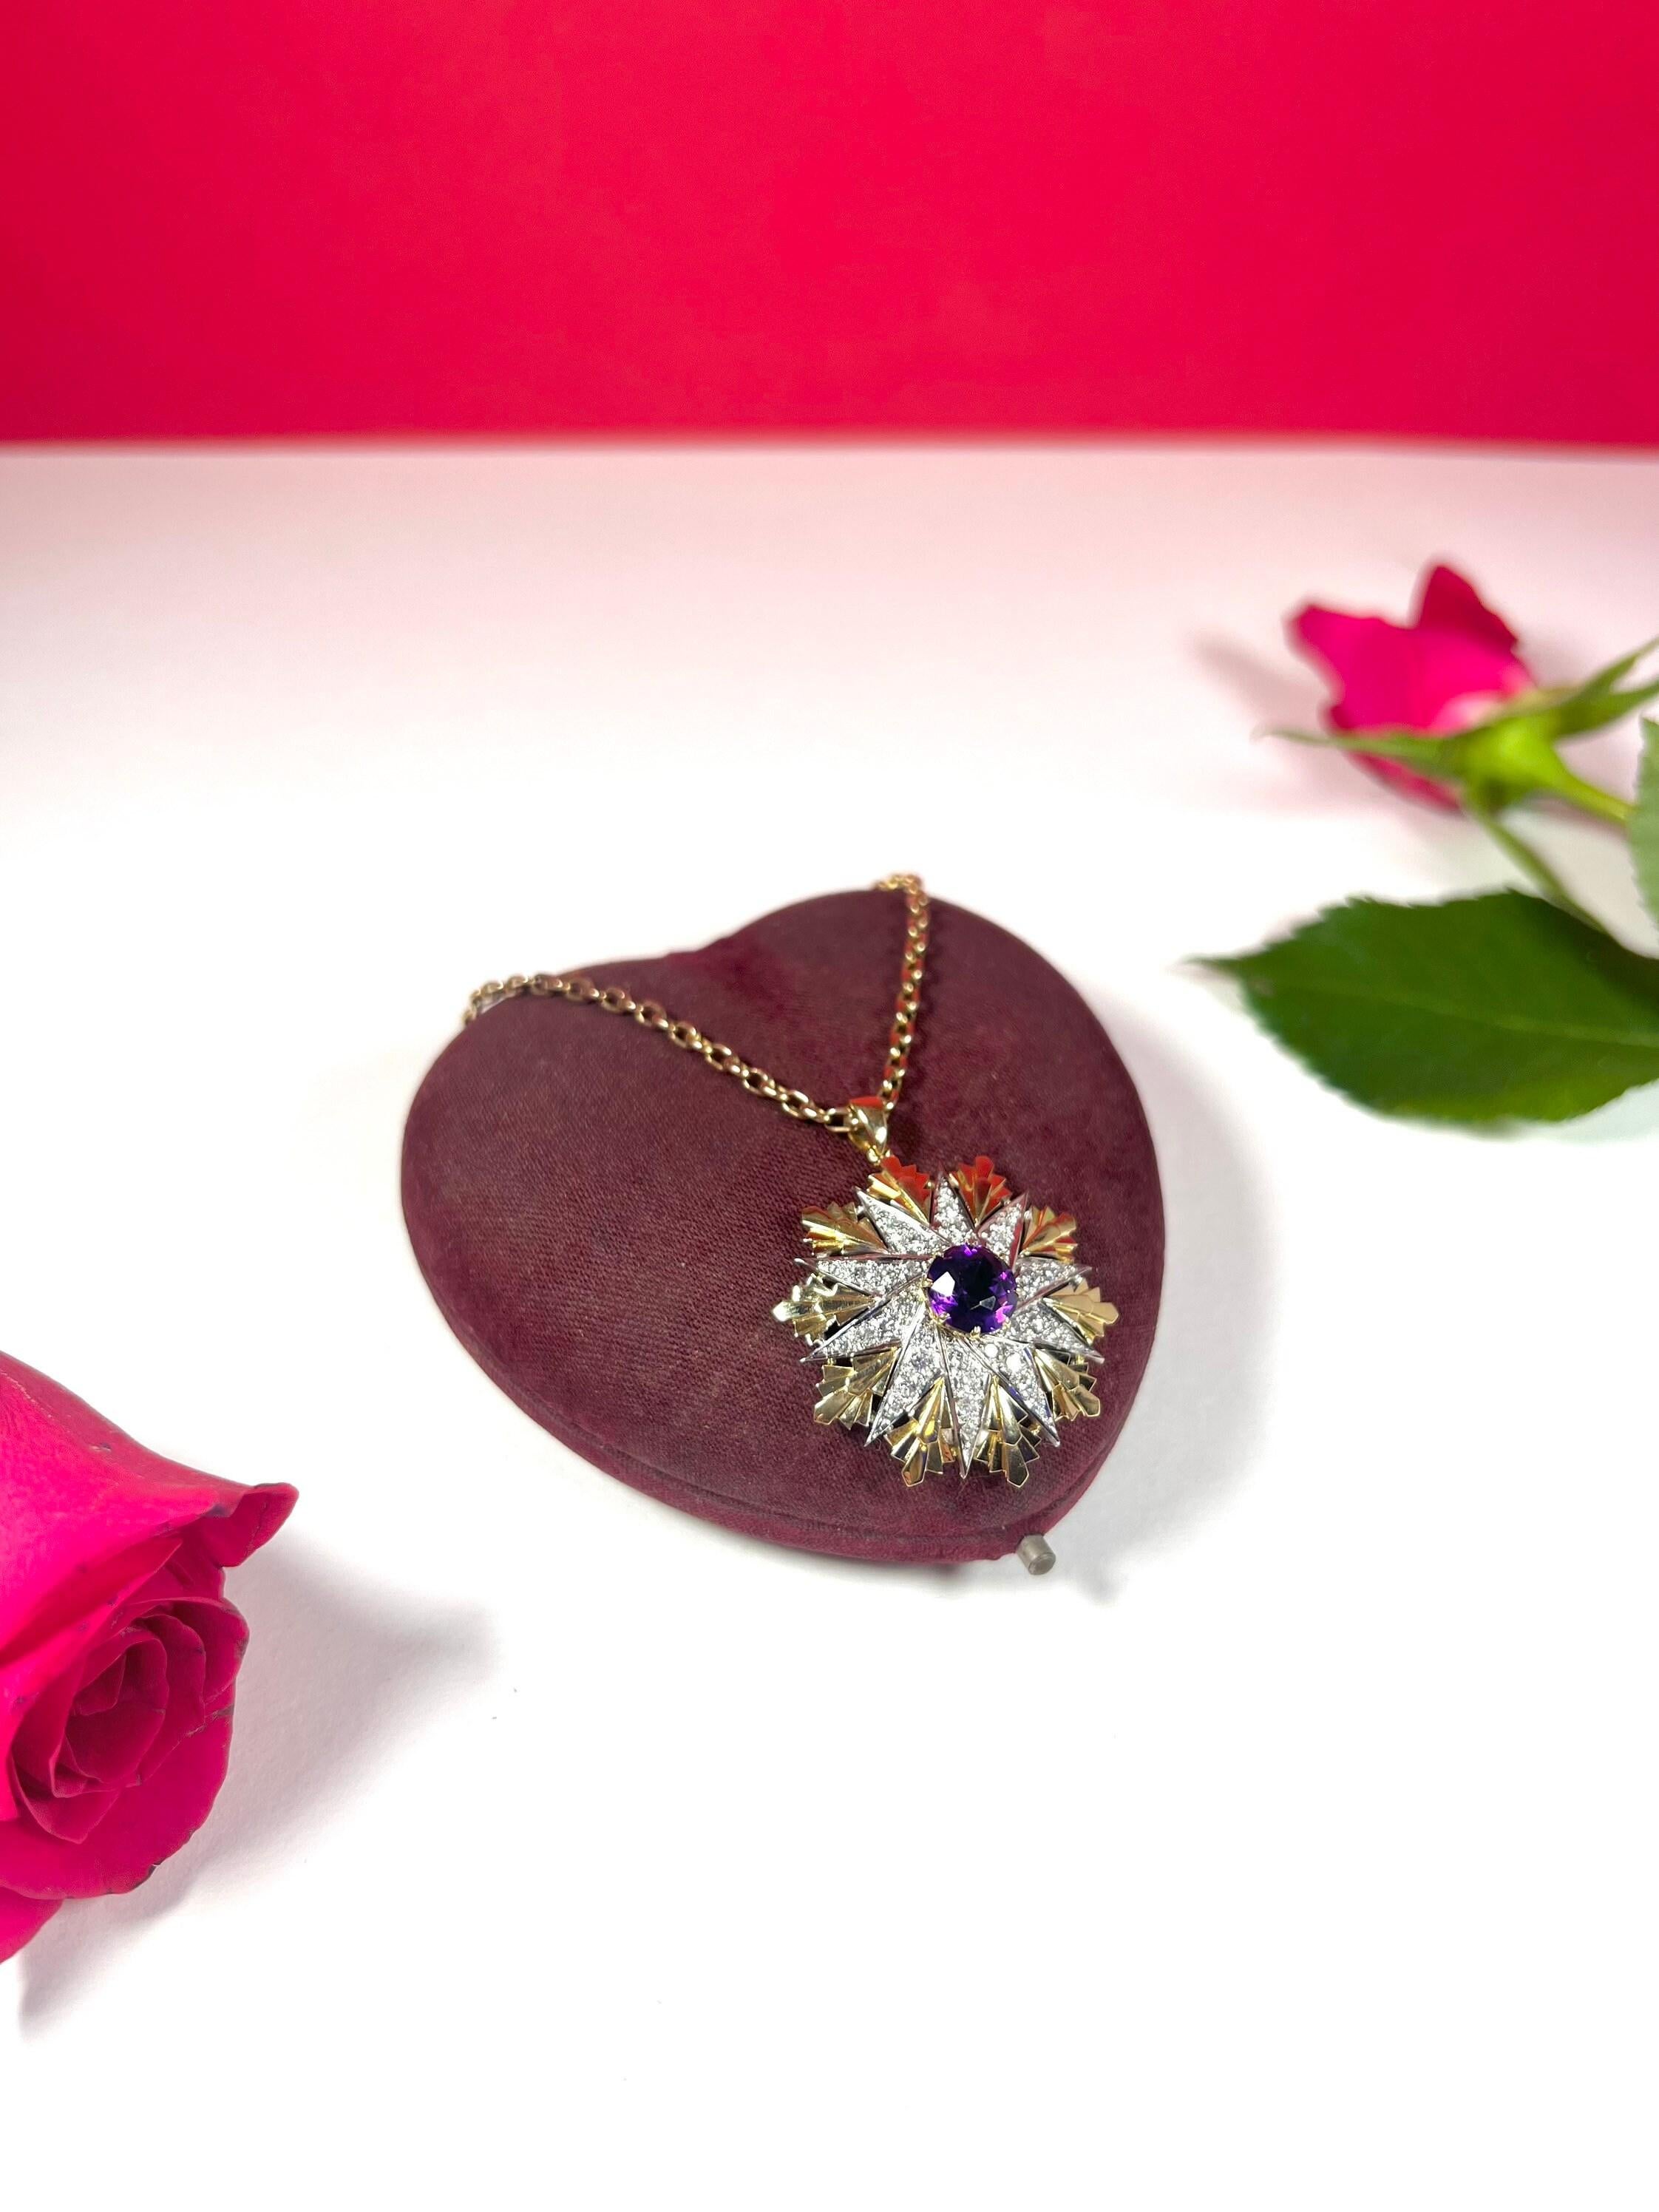 Vintage Amethyst & Diamond Pendant 

18ct Gold Tested

Circa 1940’s

Stunning 18ct Yellow & White Gold Pendant 
Fabulous 10 Point Star Design with Centre Faceted Amethyst & White Gold, Diamond Set Points. The Yellow Gold Deco Inspired Fans Really